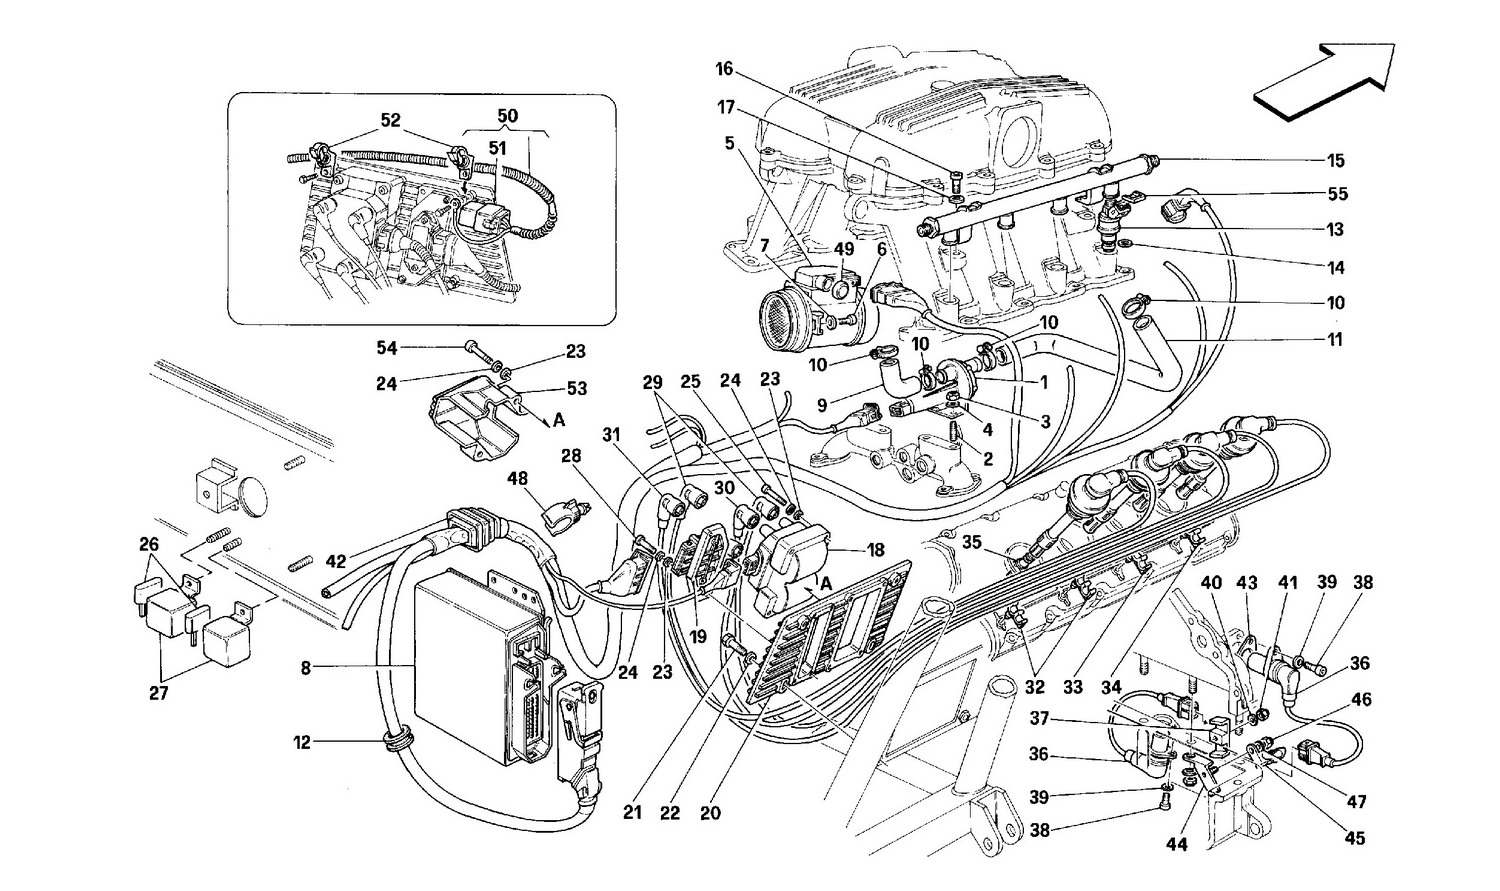 Schematic: Air Injection Ignition -Motronic 2.5-